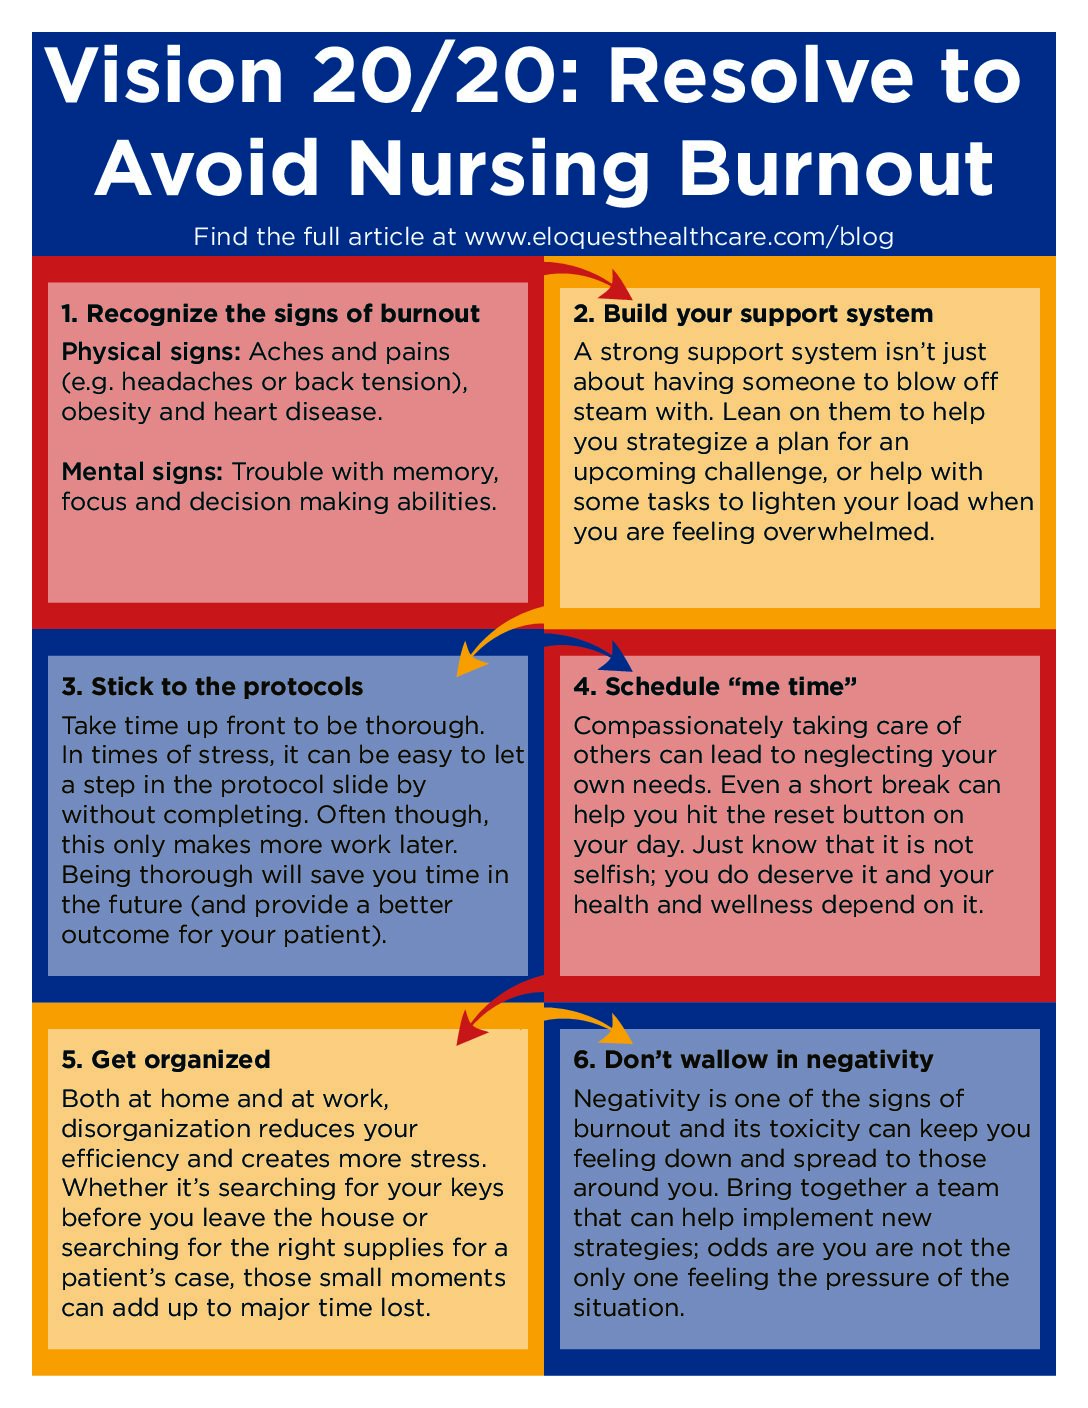 Ways to Prevent Nurse Fatigue: Smart Tips for Anyone With a